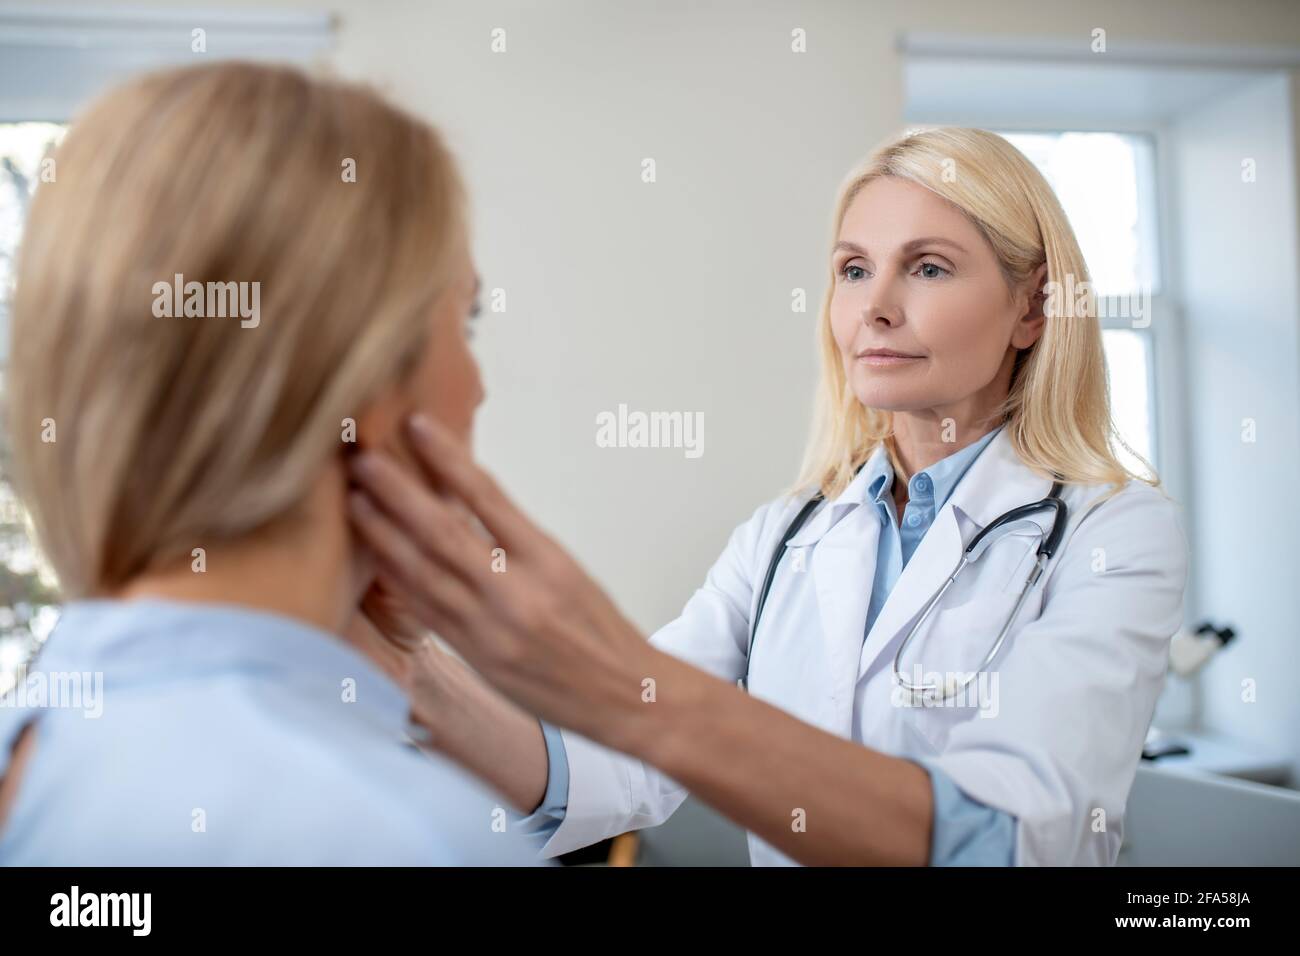 Doctor touching patients neck with his hands Stock Photo